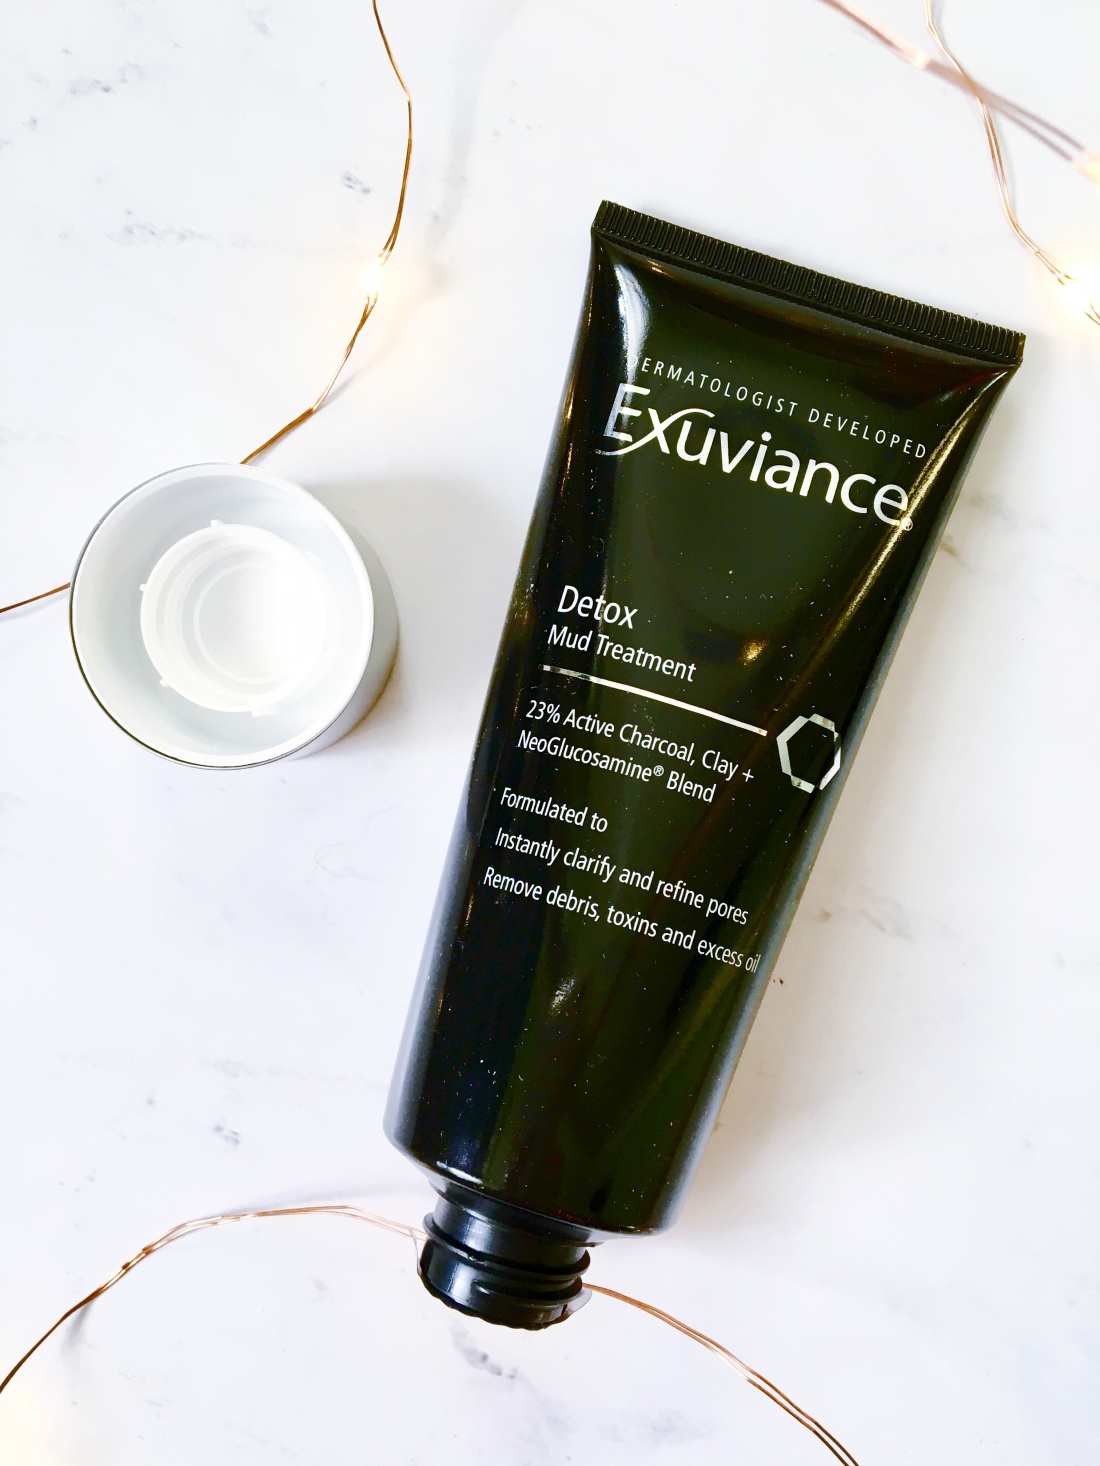 Exuviance Detox Mud Treatment | Product Review